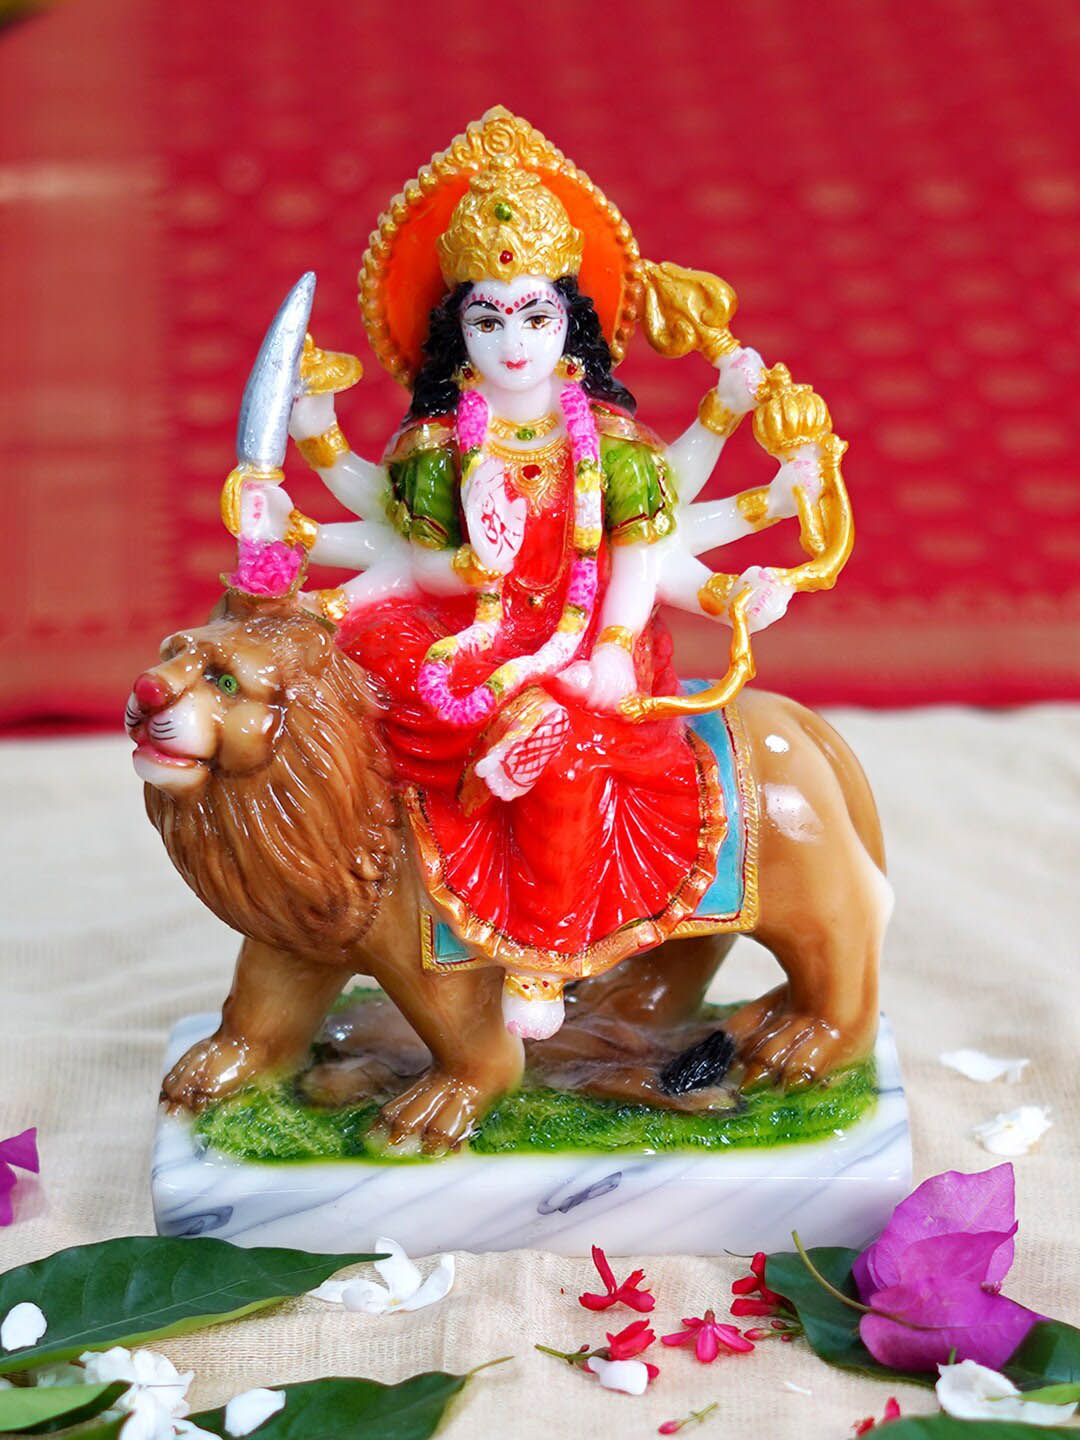 Gallery99 Red & Brown Sherawali Mata Showpieces Price in India